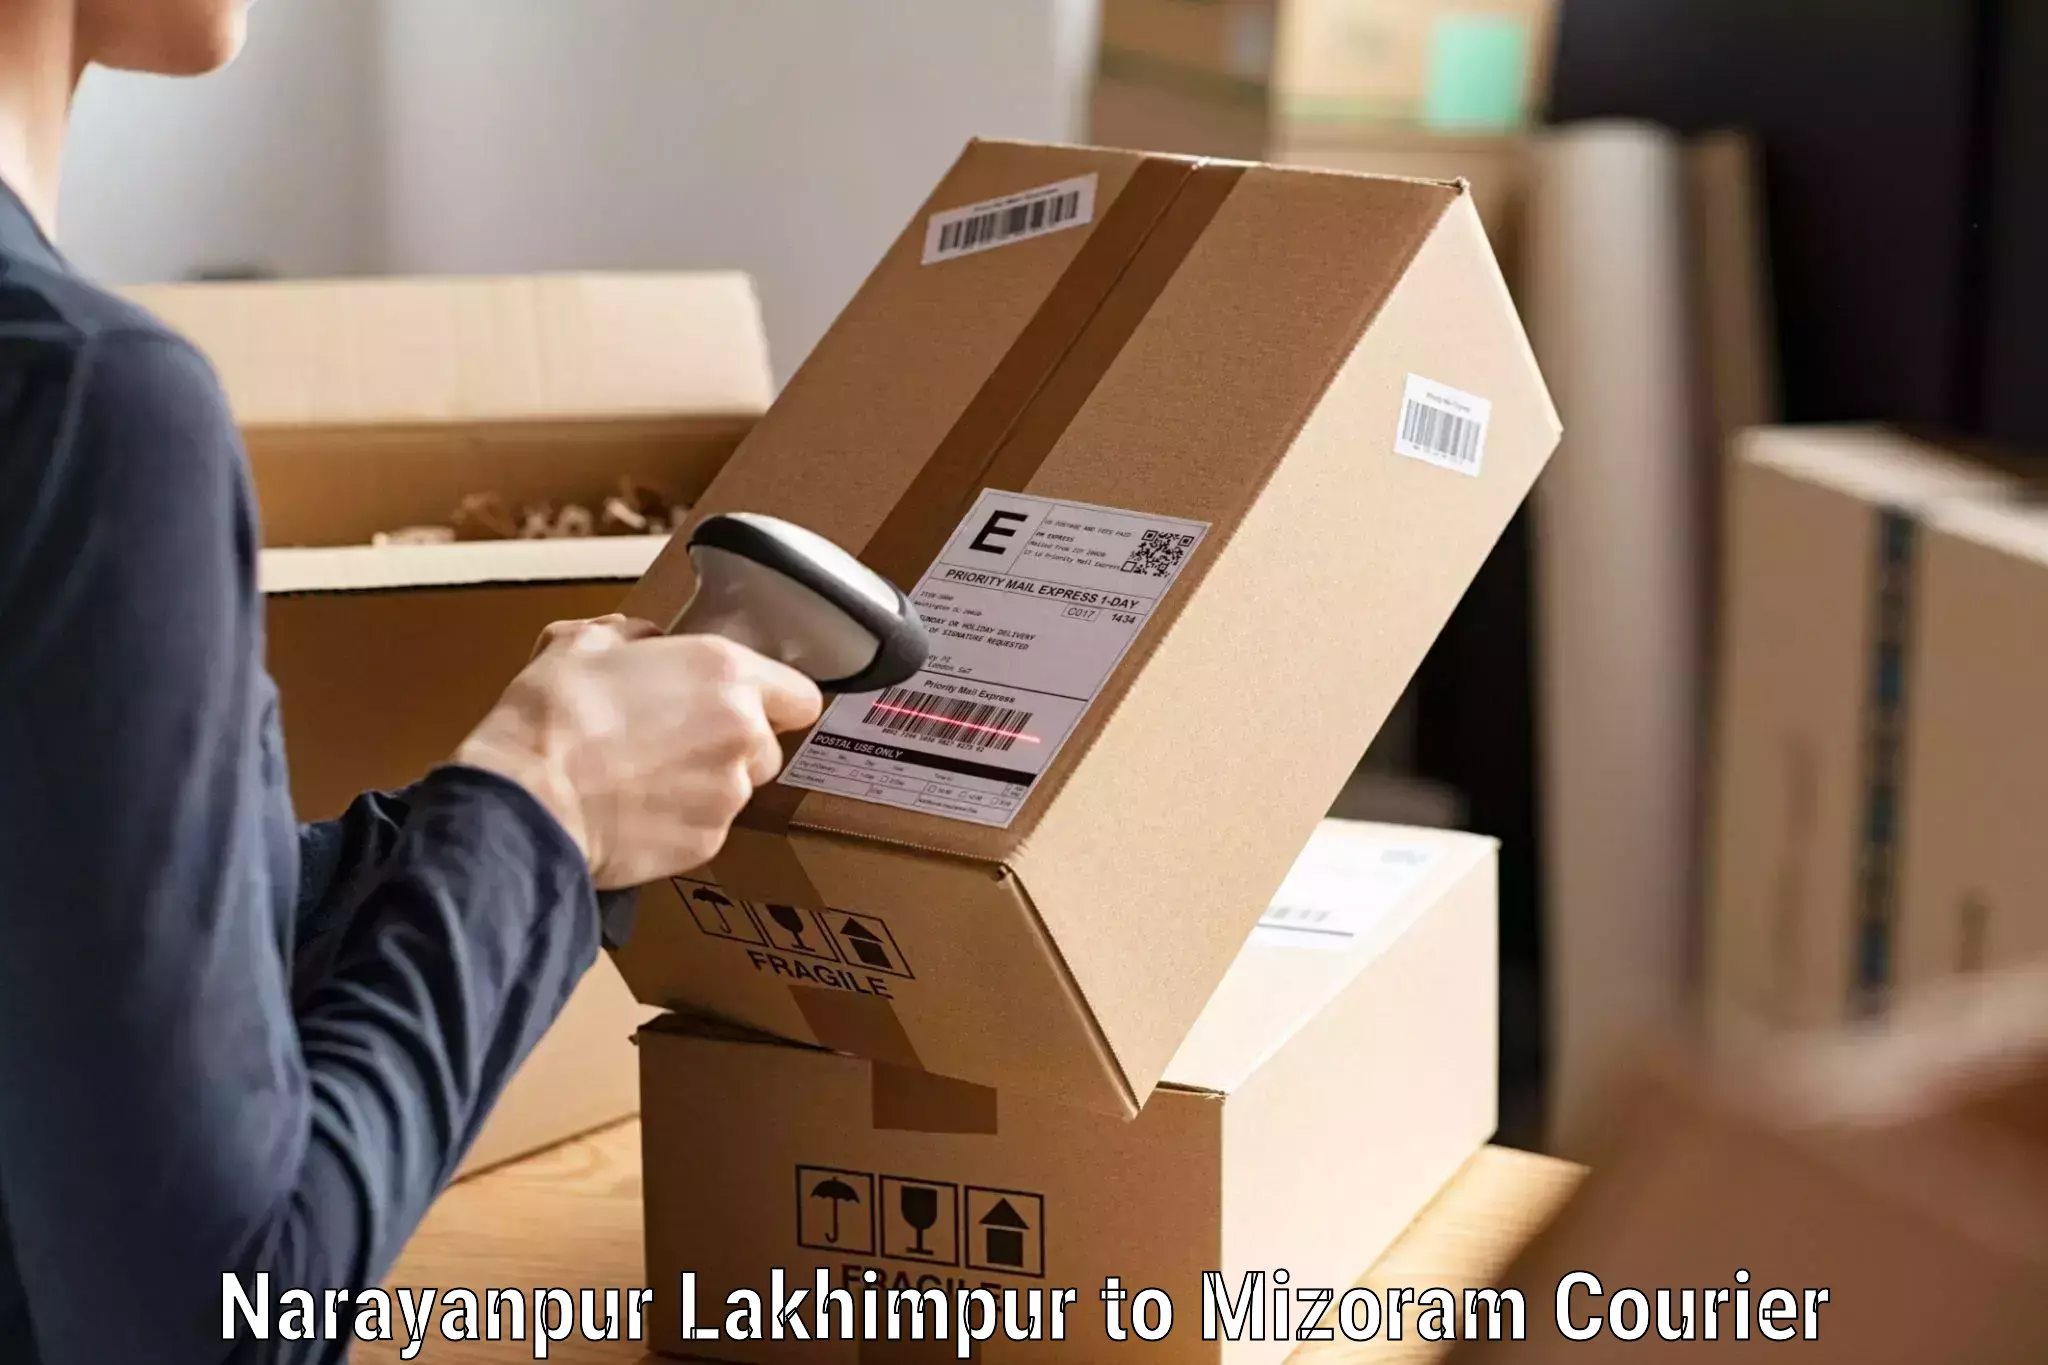 24-hour delivery options Narayanpur Lakhimpur to Mizoram